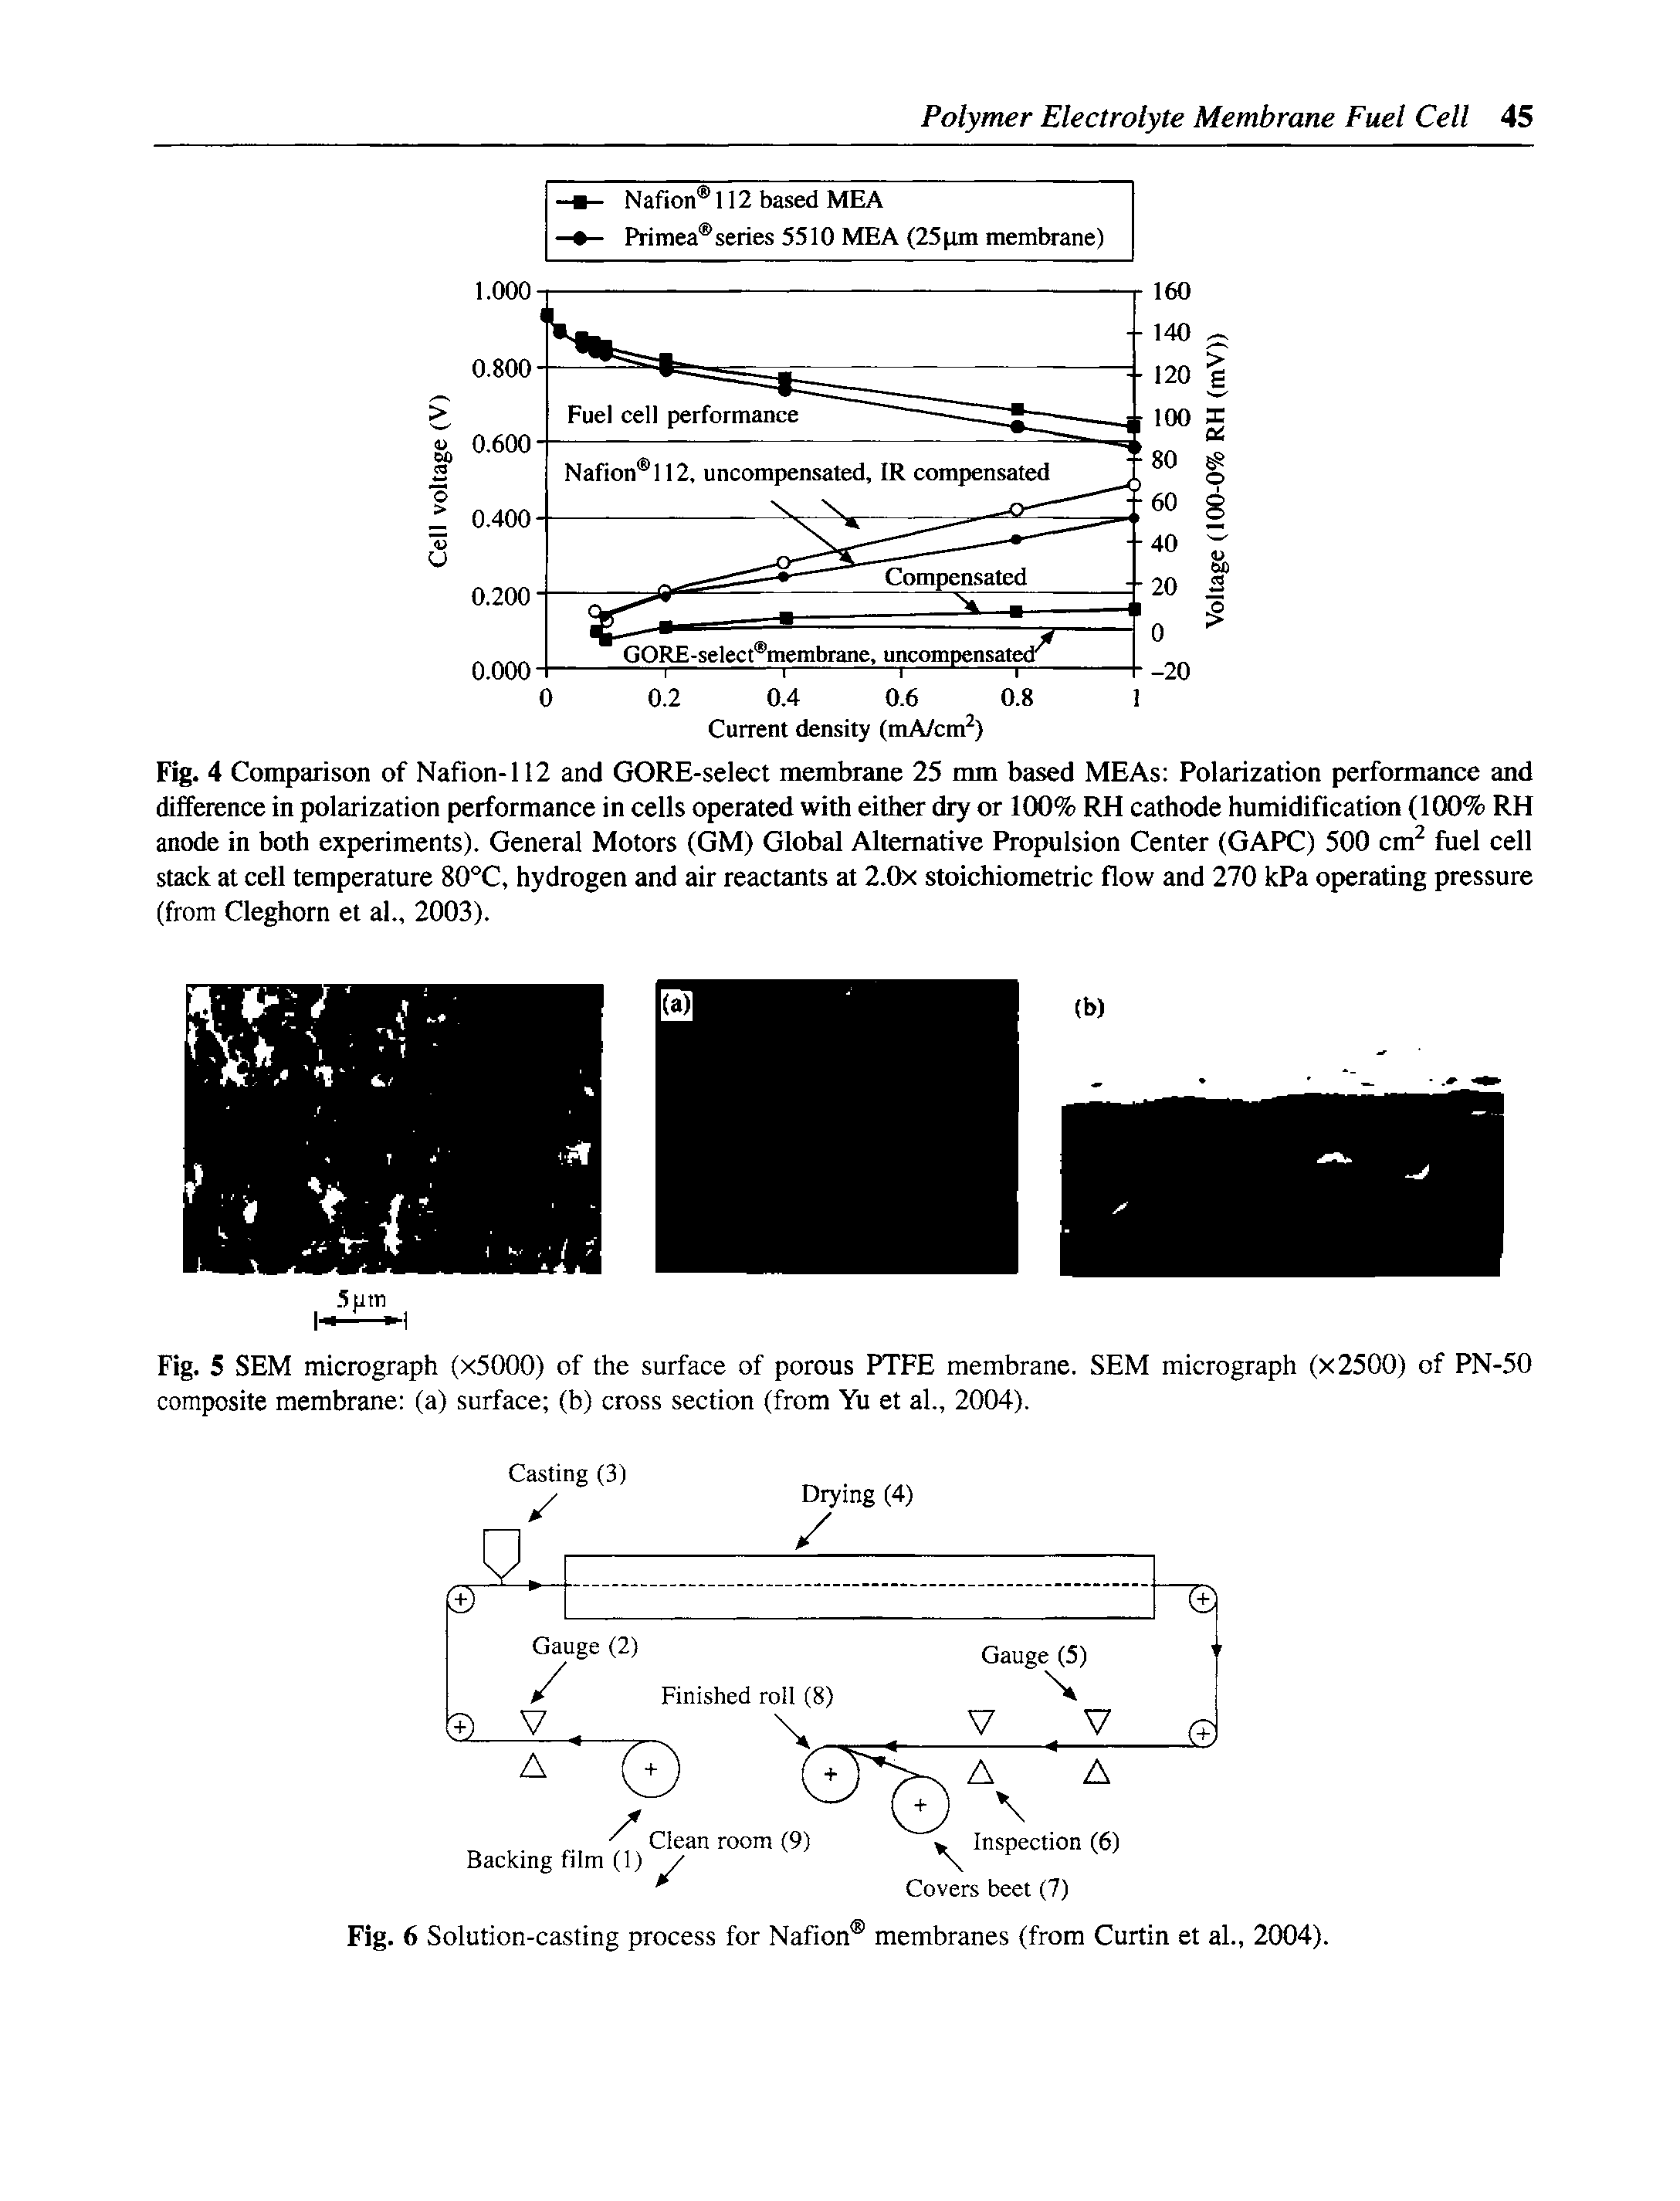 Fig. 4 Comparison of Nafion-112 and GORE-select membrane 25 mm based MEAs Polarization performance and difference in polarization performance in cells operated with either dry or 100% RH cathode humidification (1(X)% RH anode in both experiments). General Motors (GM) Global Alternative Propulsion Center (GAPC) 500 cm fuel cell stack at cell temperature 80°C, hydrogen and air reactants at 2.0x stoichiometric flow and 270 kPa operating pressure (from Cleghorn et al., 2003).